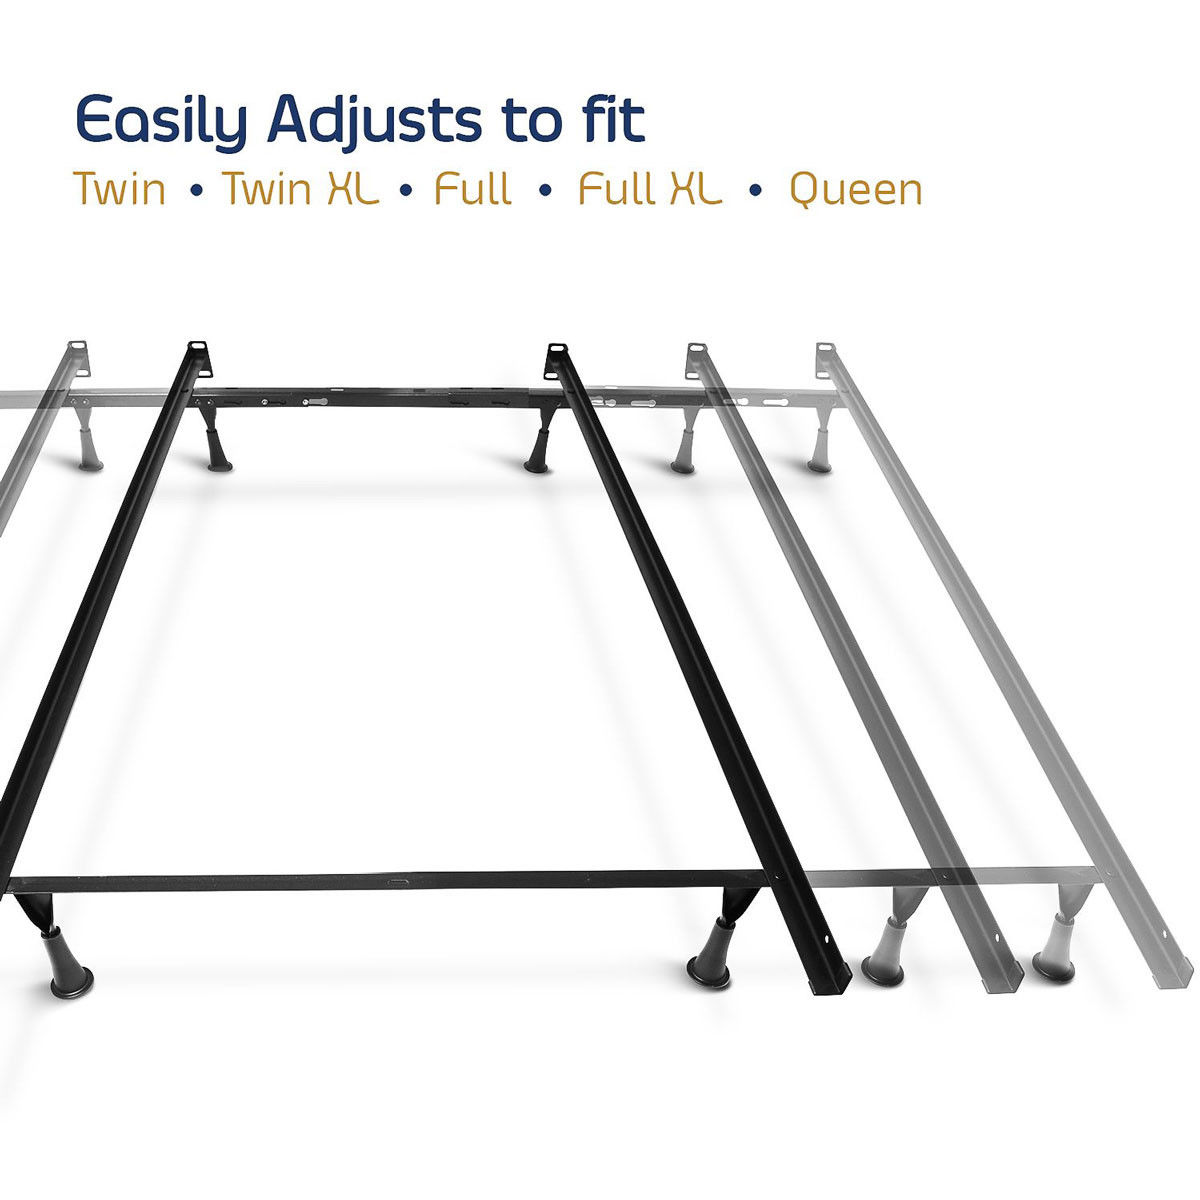 Are the metal bed frame pieces easily adjustable in size?